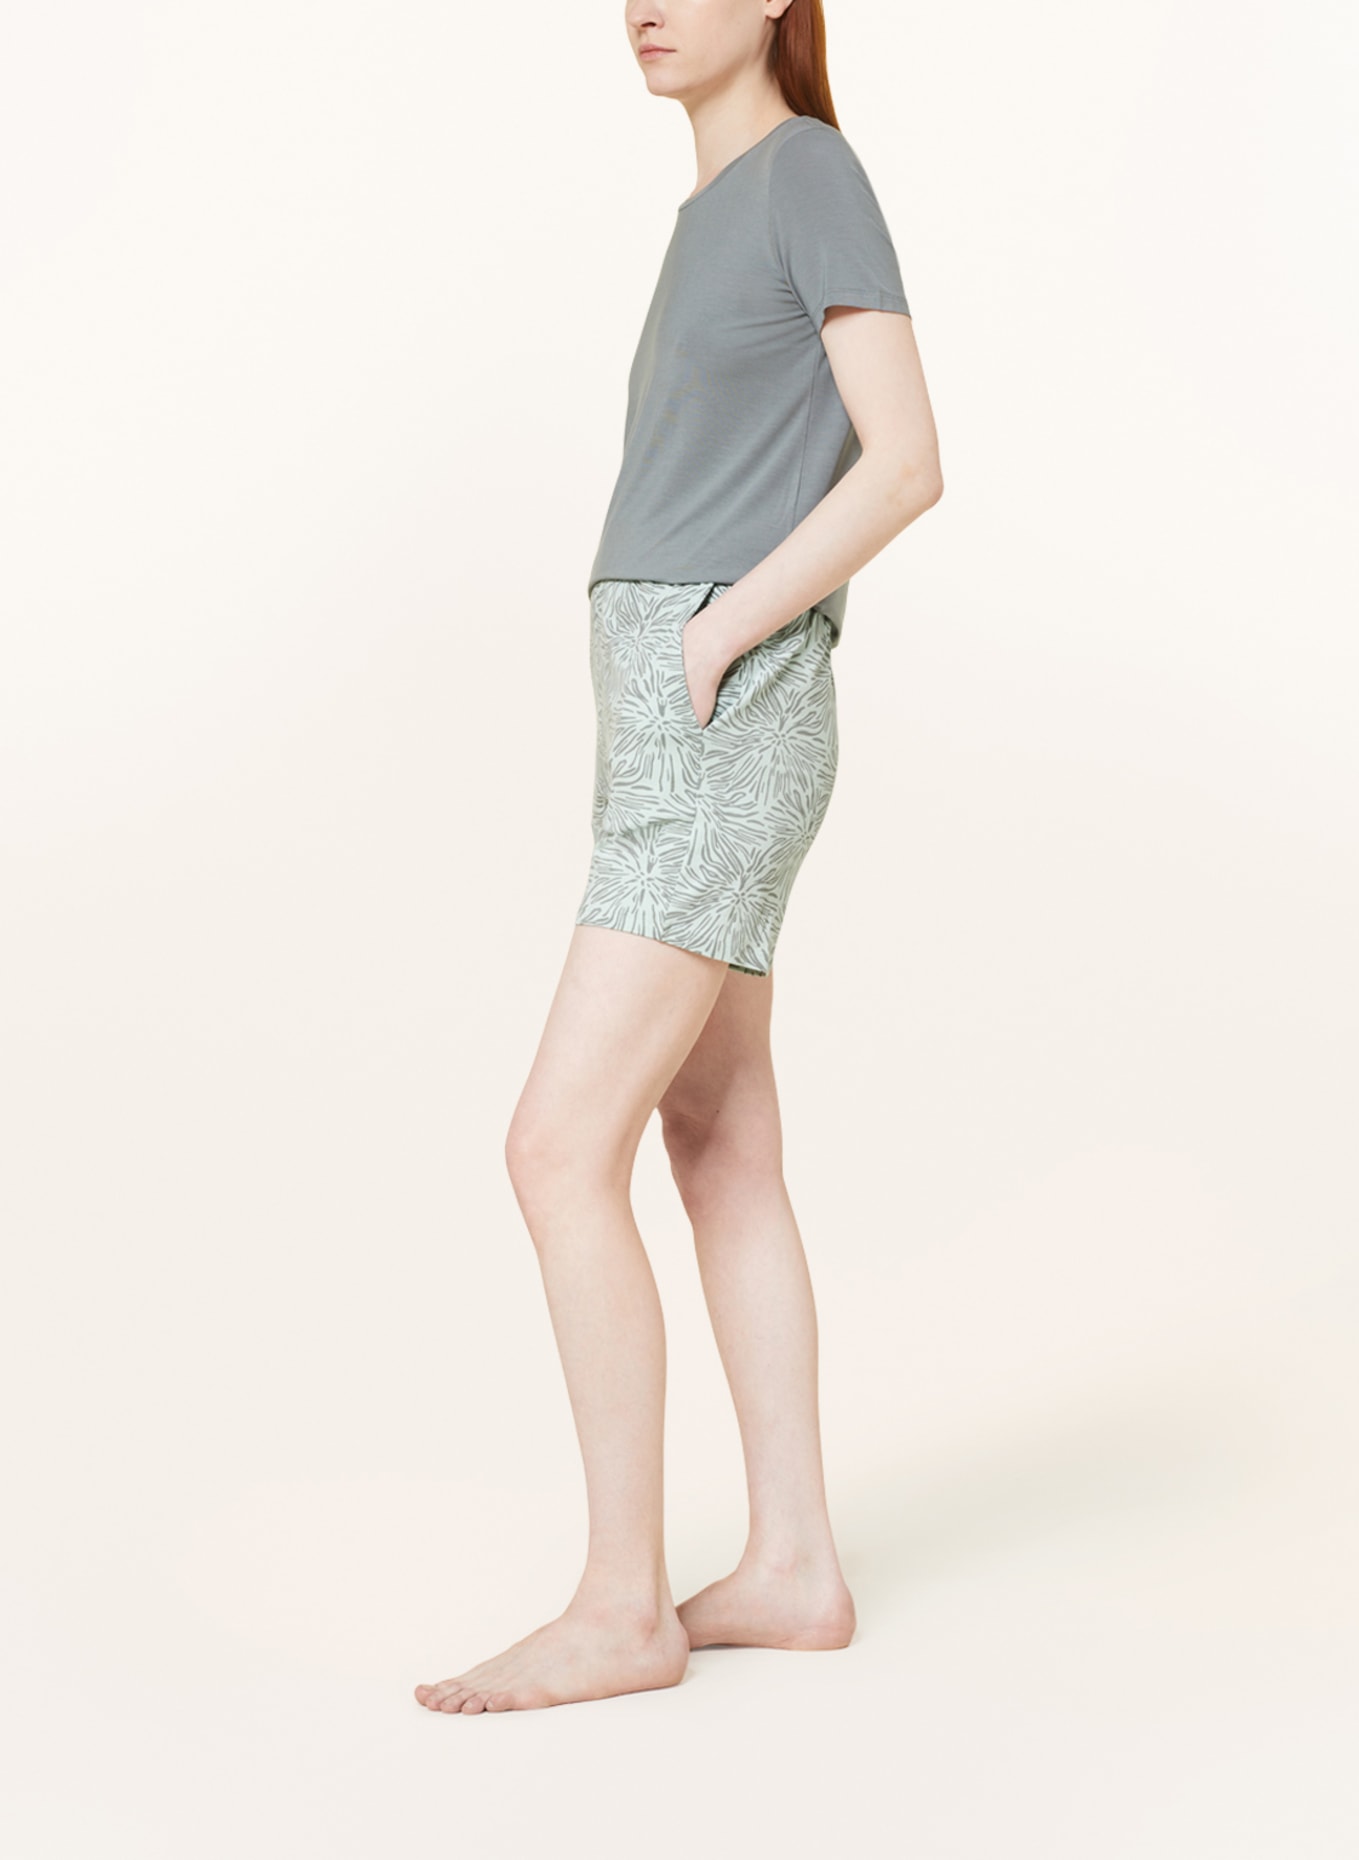 SCHIESSER Pajama shorts MIX+RELAX, Color: LIGHT GREEN/ GRAY (Image 4)